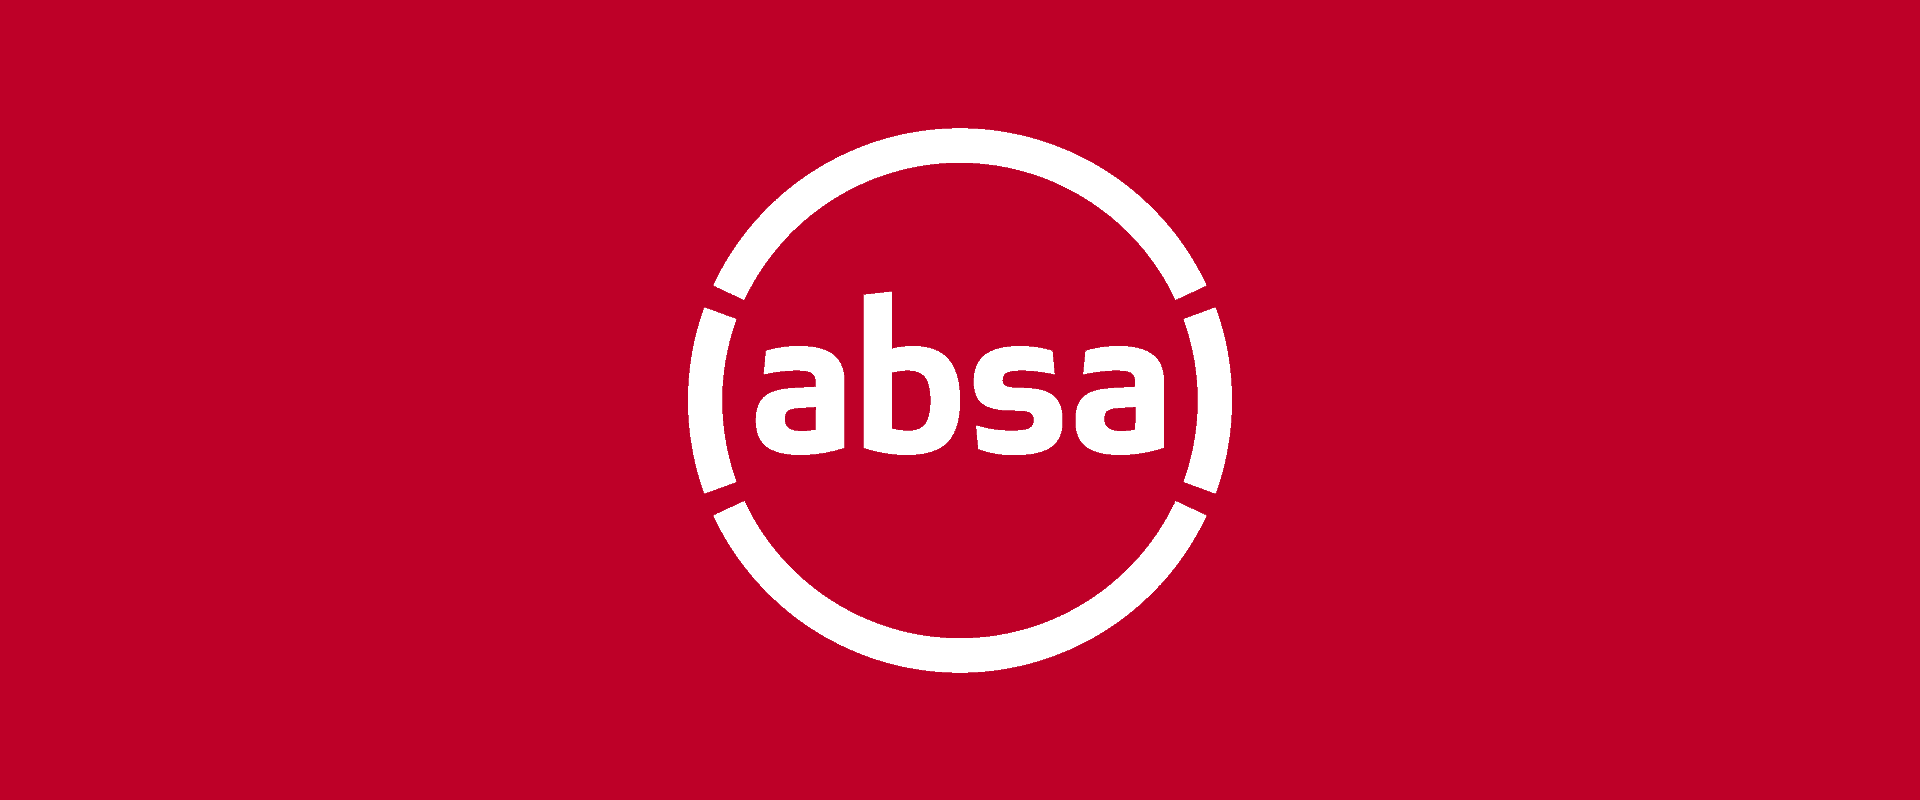 Absa got the basics right in 2021